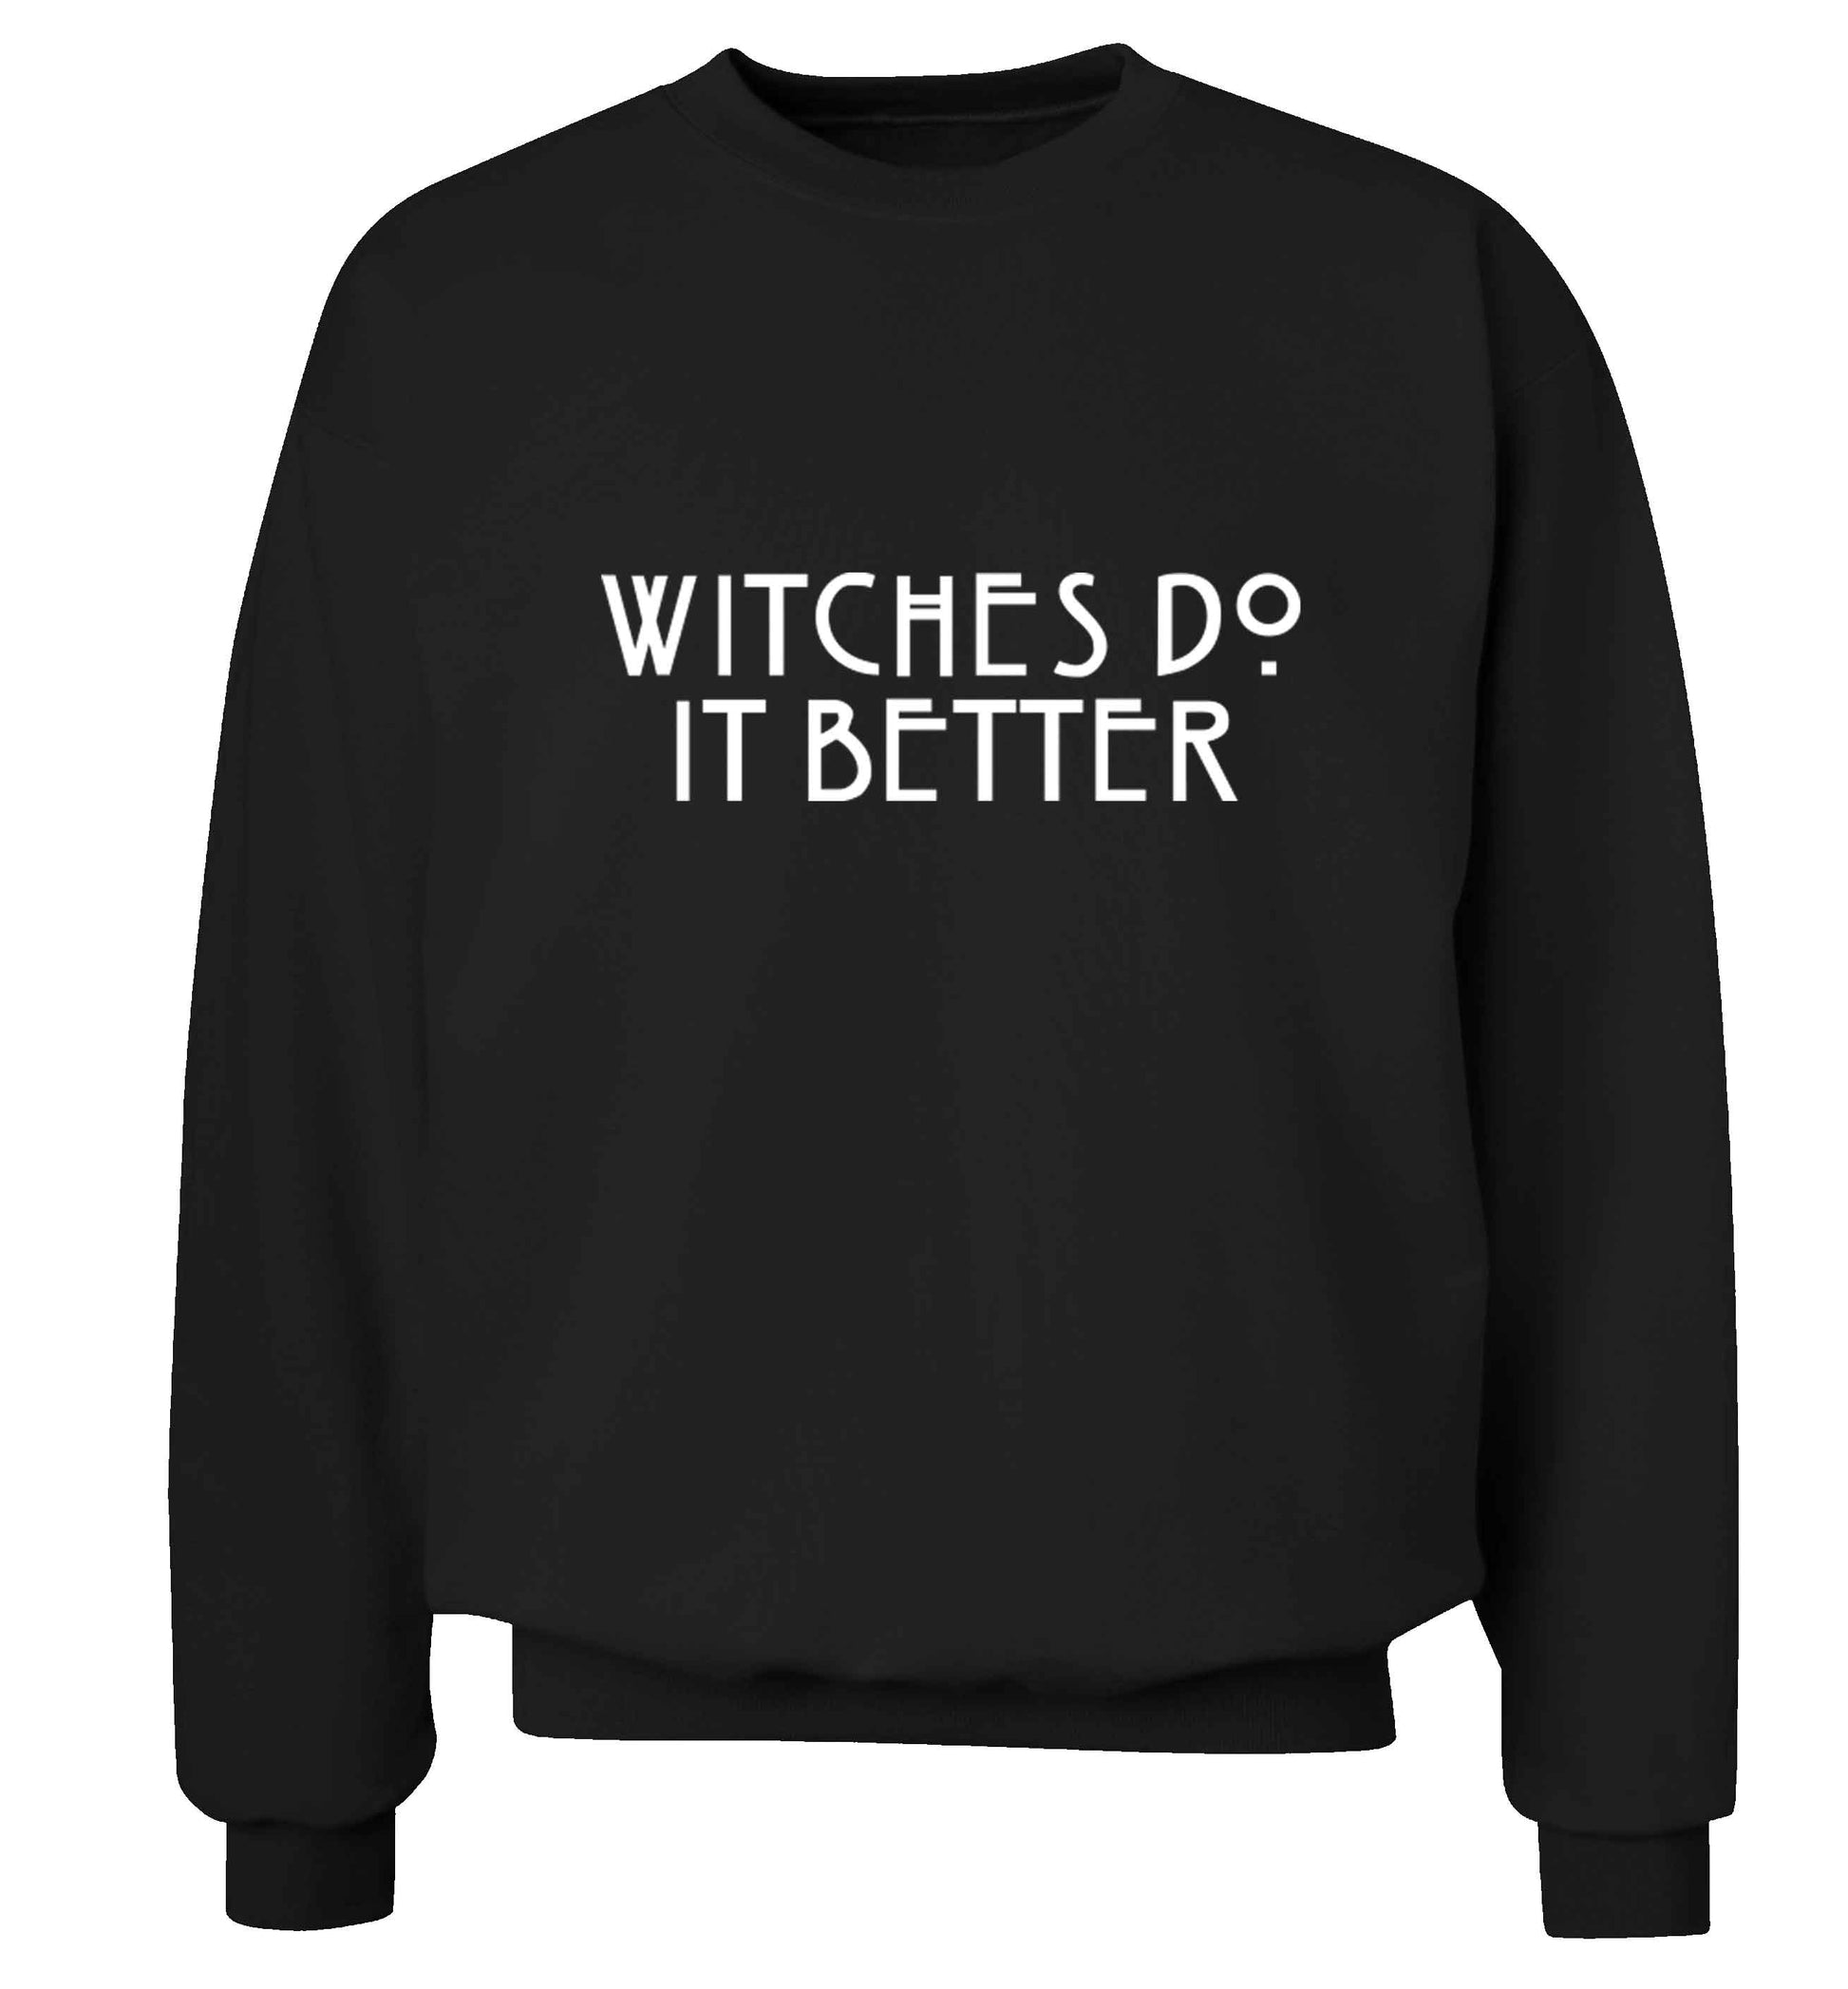 Witches do it better adult's unisex black sweater 2XL